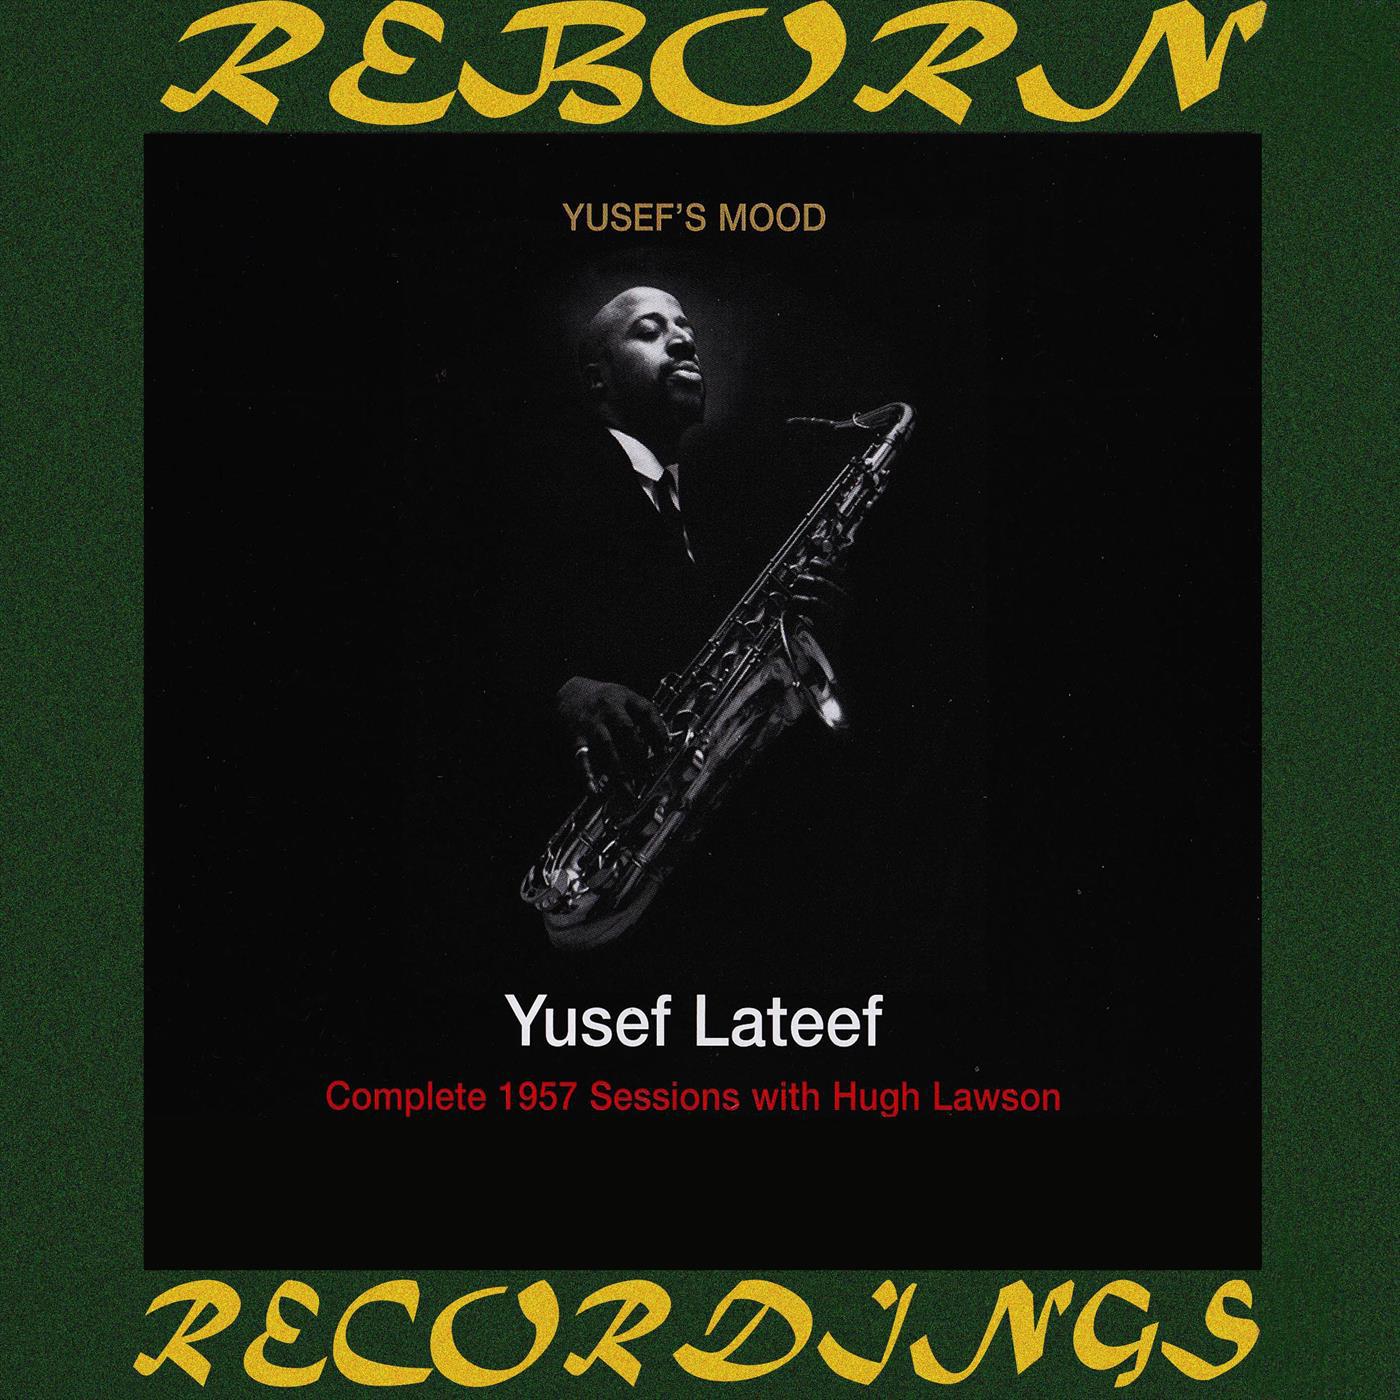 Yusef's Mood Complete 1957 Sessions with Hugh Lawson (HD Remastered)